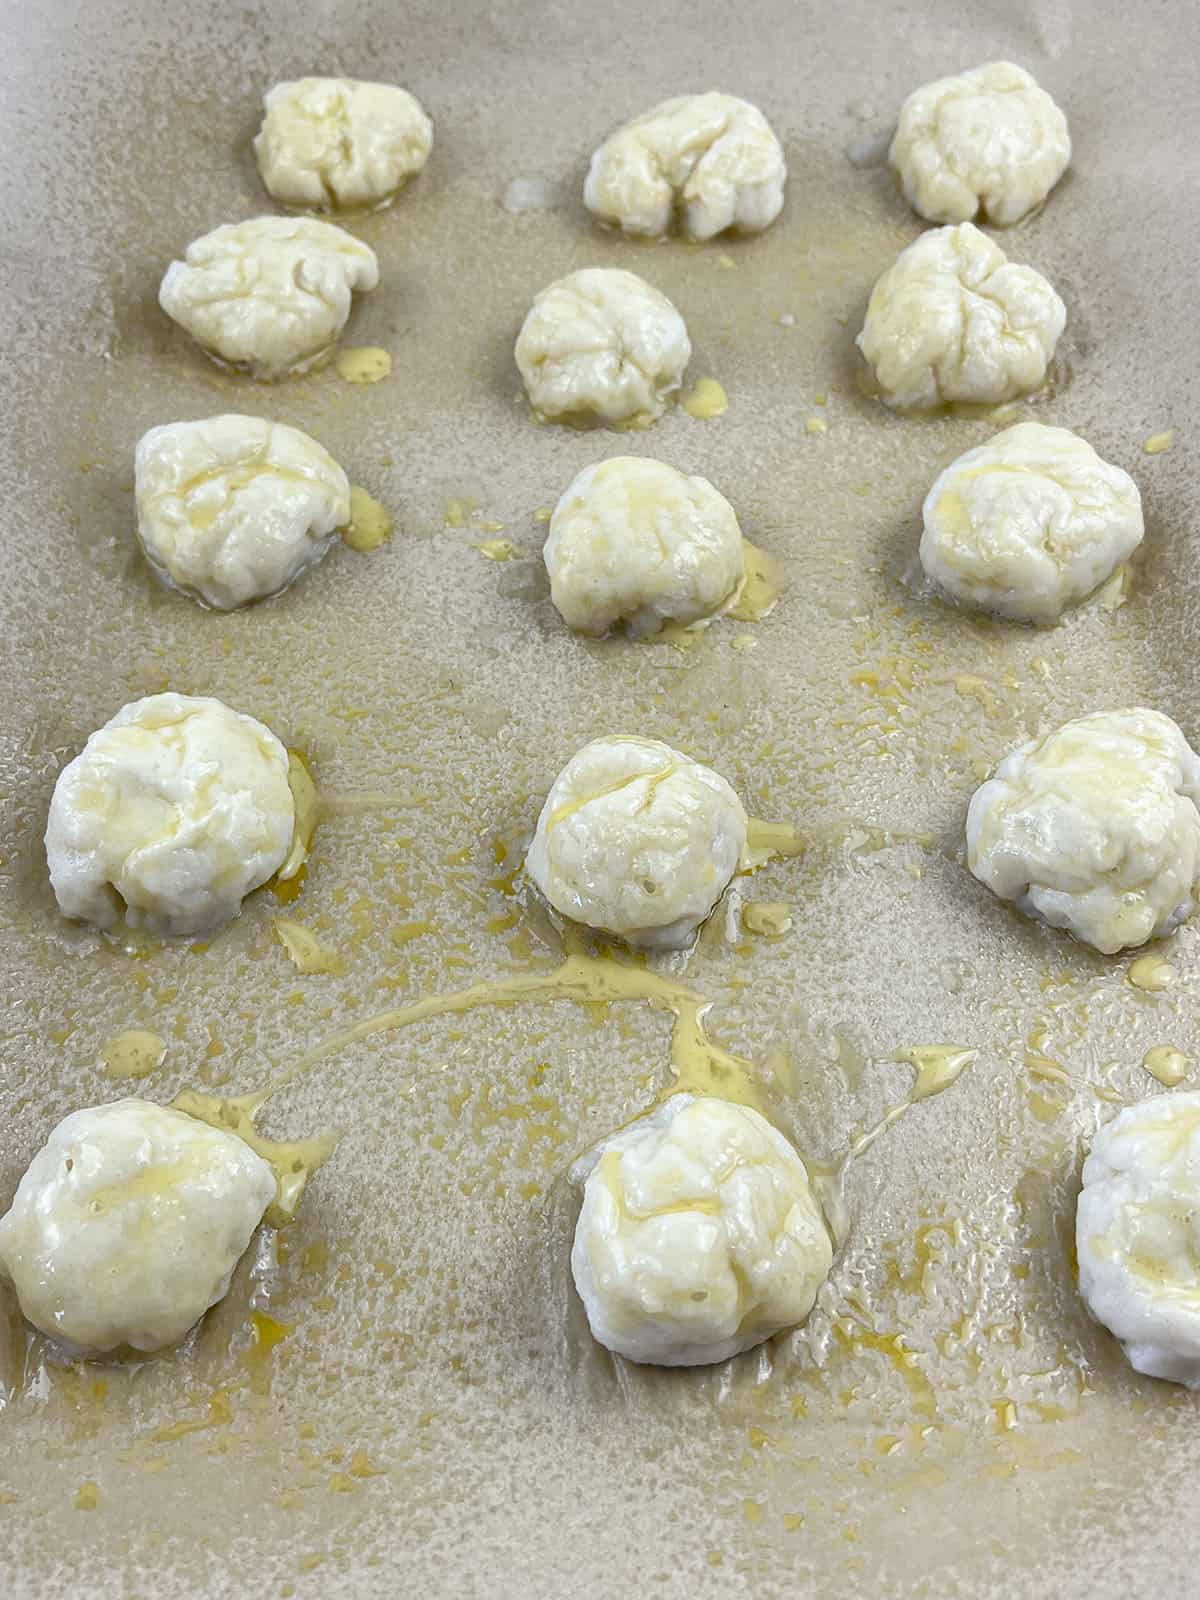 Boiled pretzel bites with egg wash, ready to go into the oven on a baking sheet.